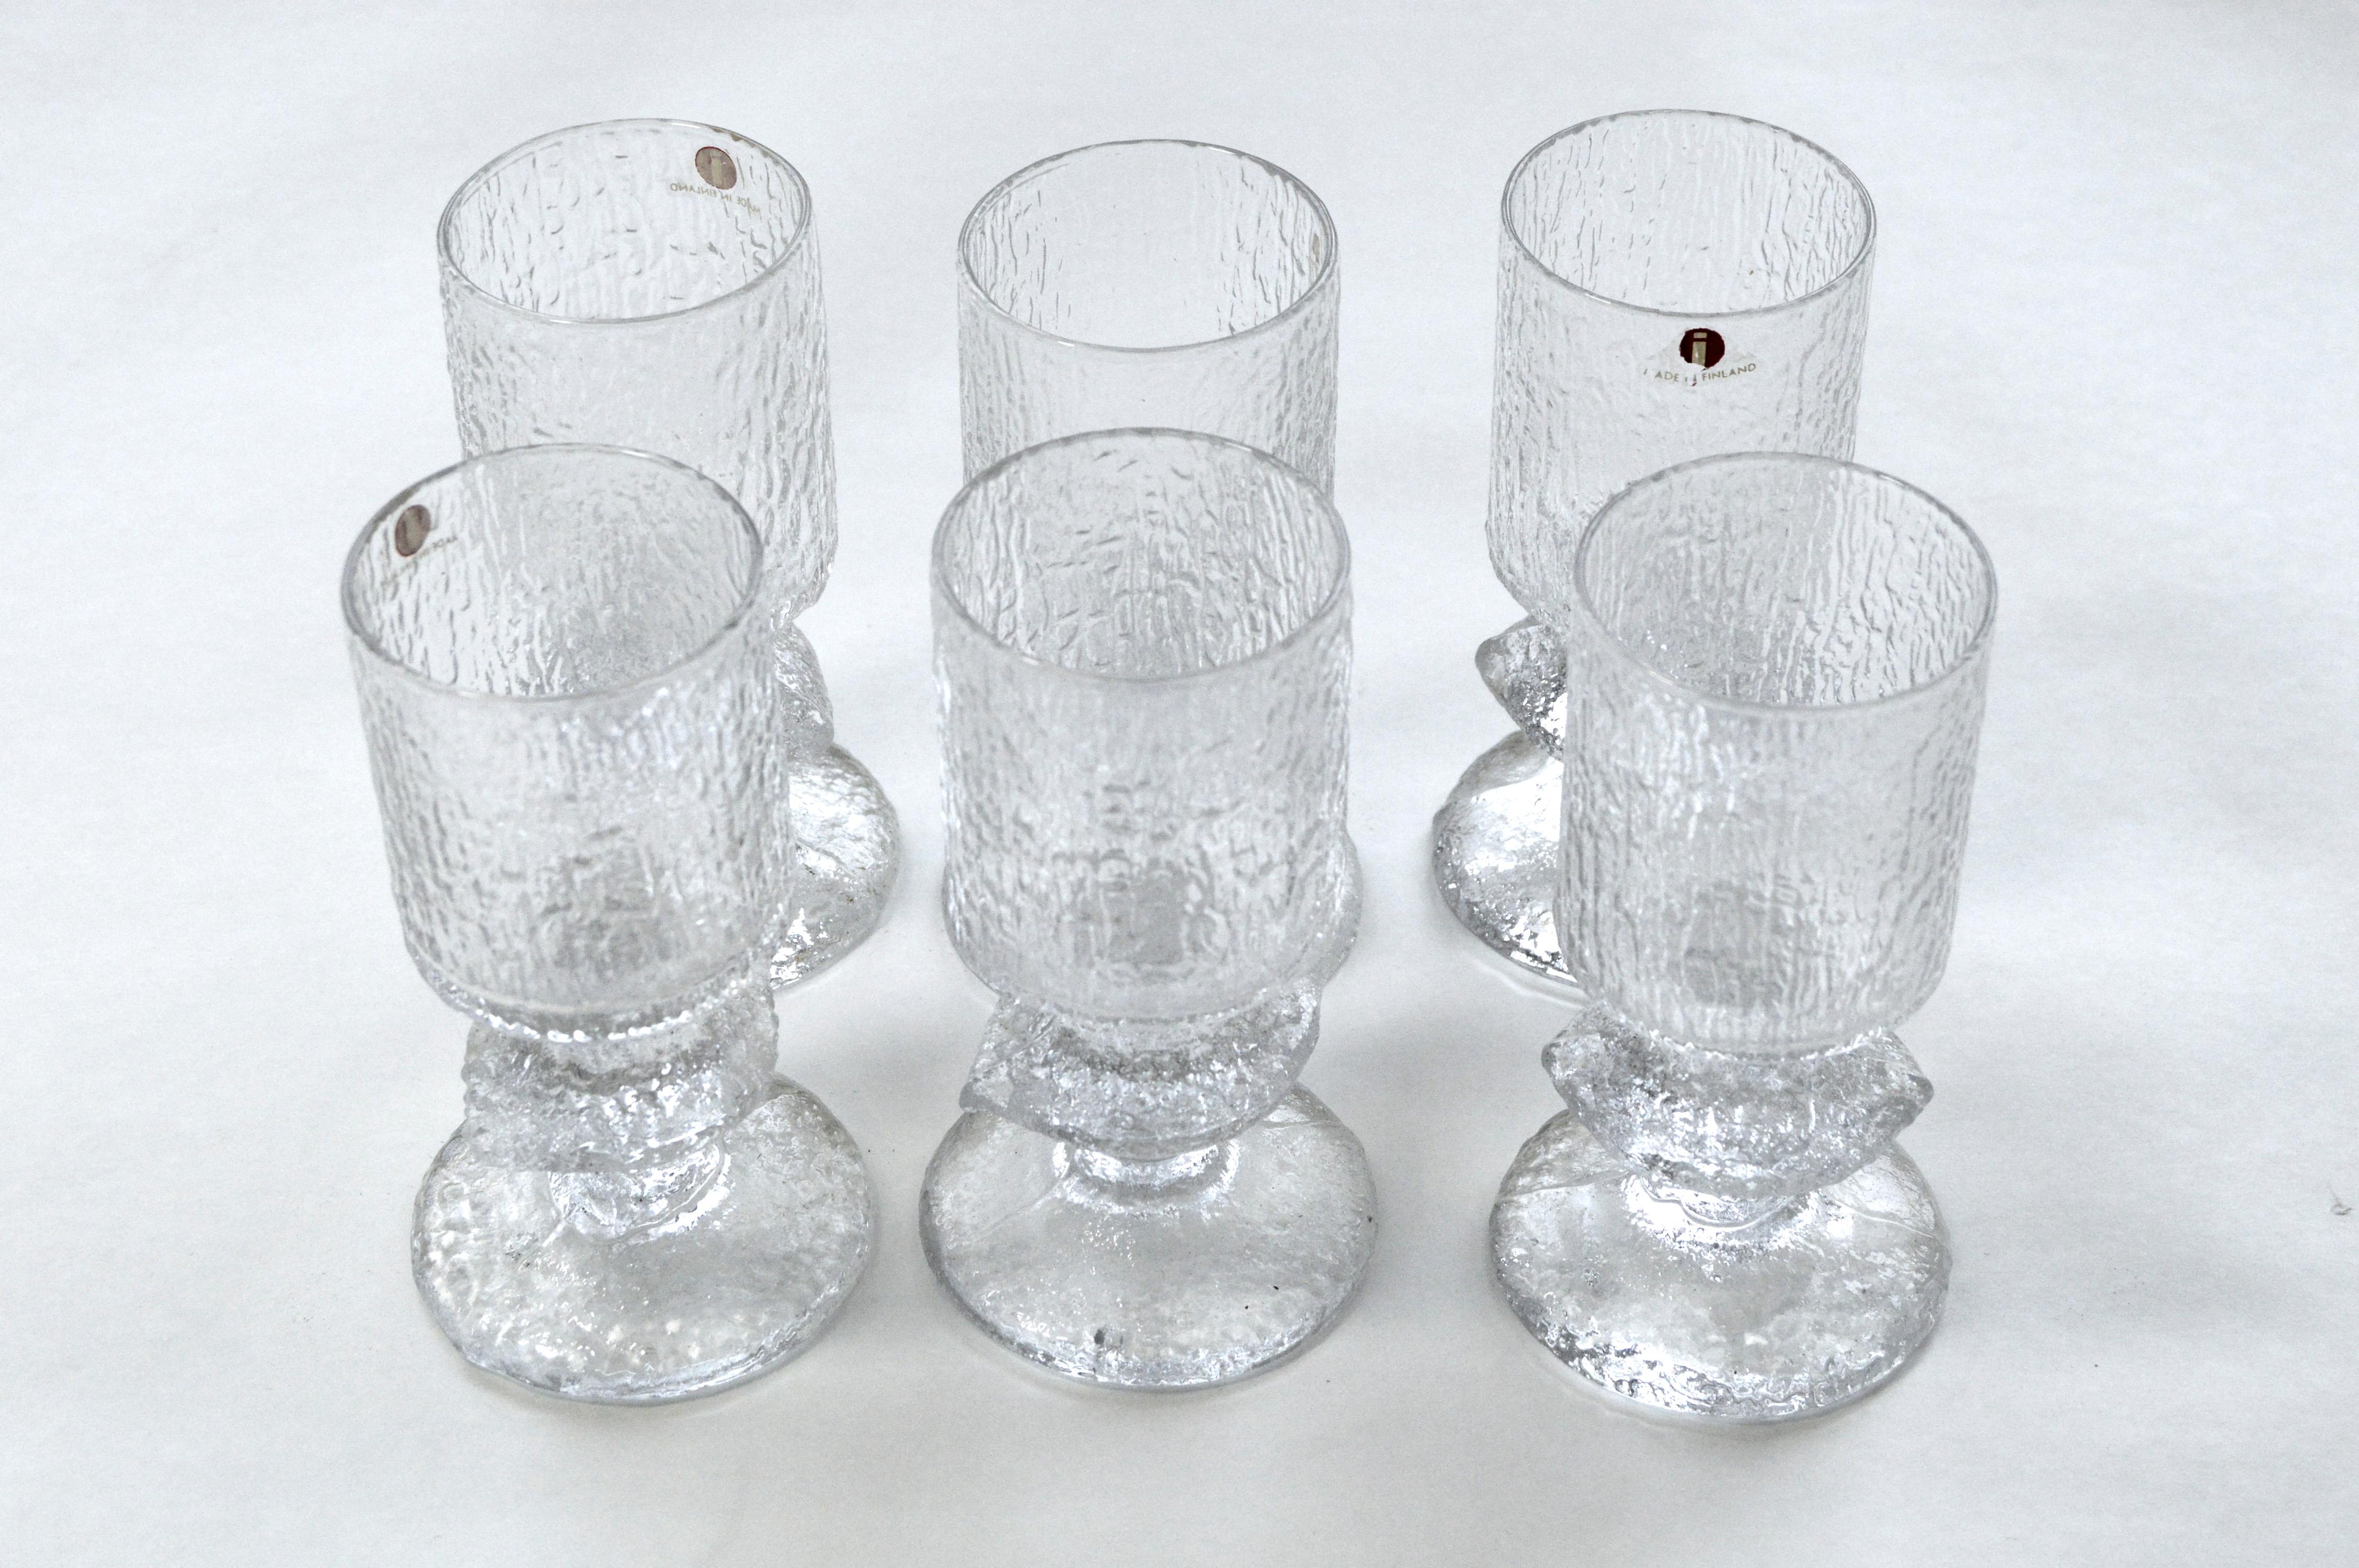 Set of glassware comprised of six large wineglasses, six small aperitif glasses, and two candlesticks. The matching pieces have a rough surface, giving the glass an ice-like texture. Produced since 1967, this glassware has become an icon of Finnish